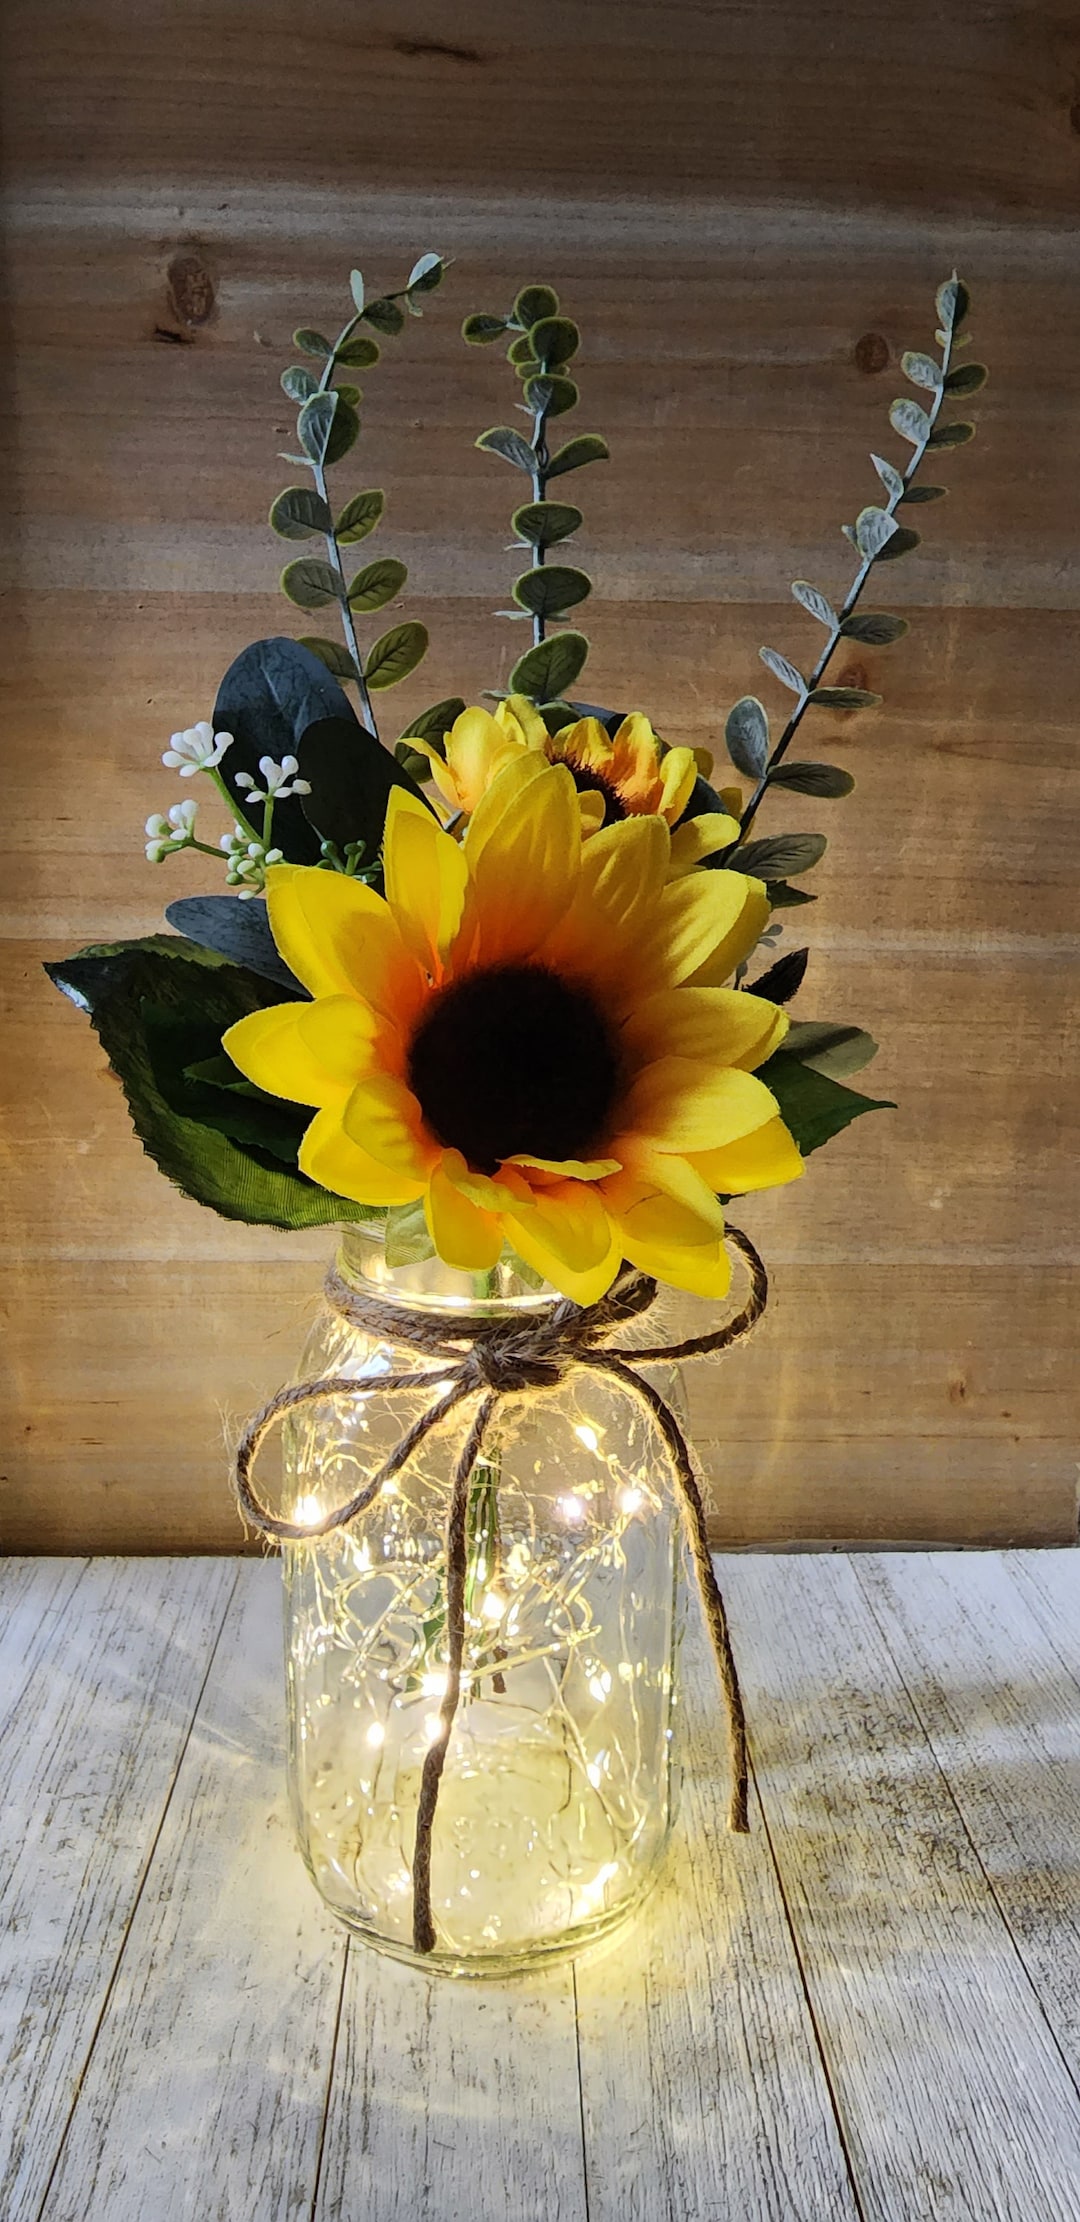 5 Unique Homemade Gifts in a Jar - A Blossoming Life